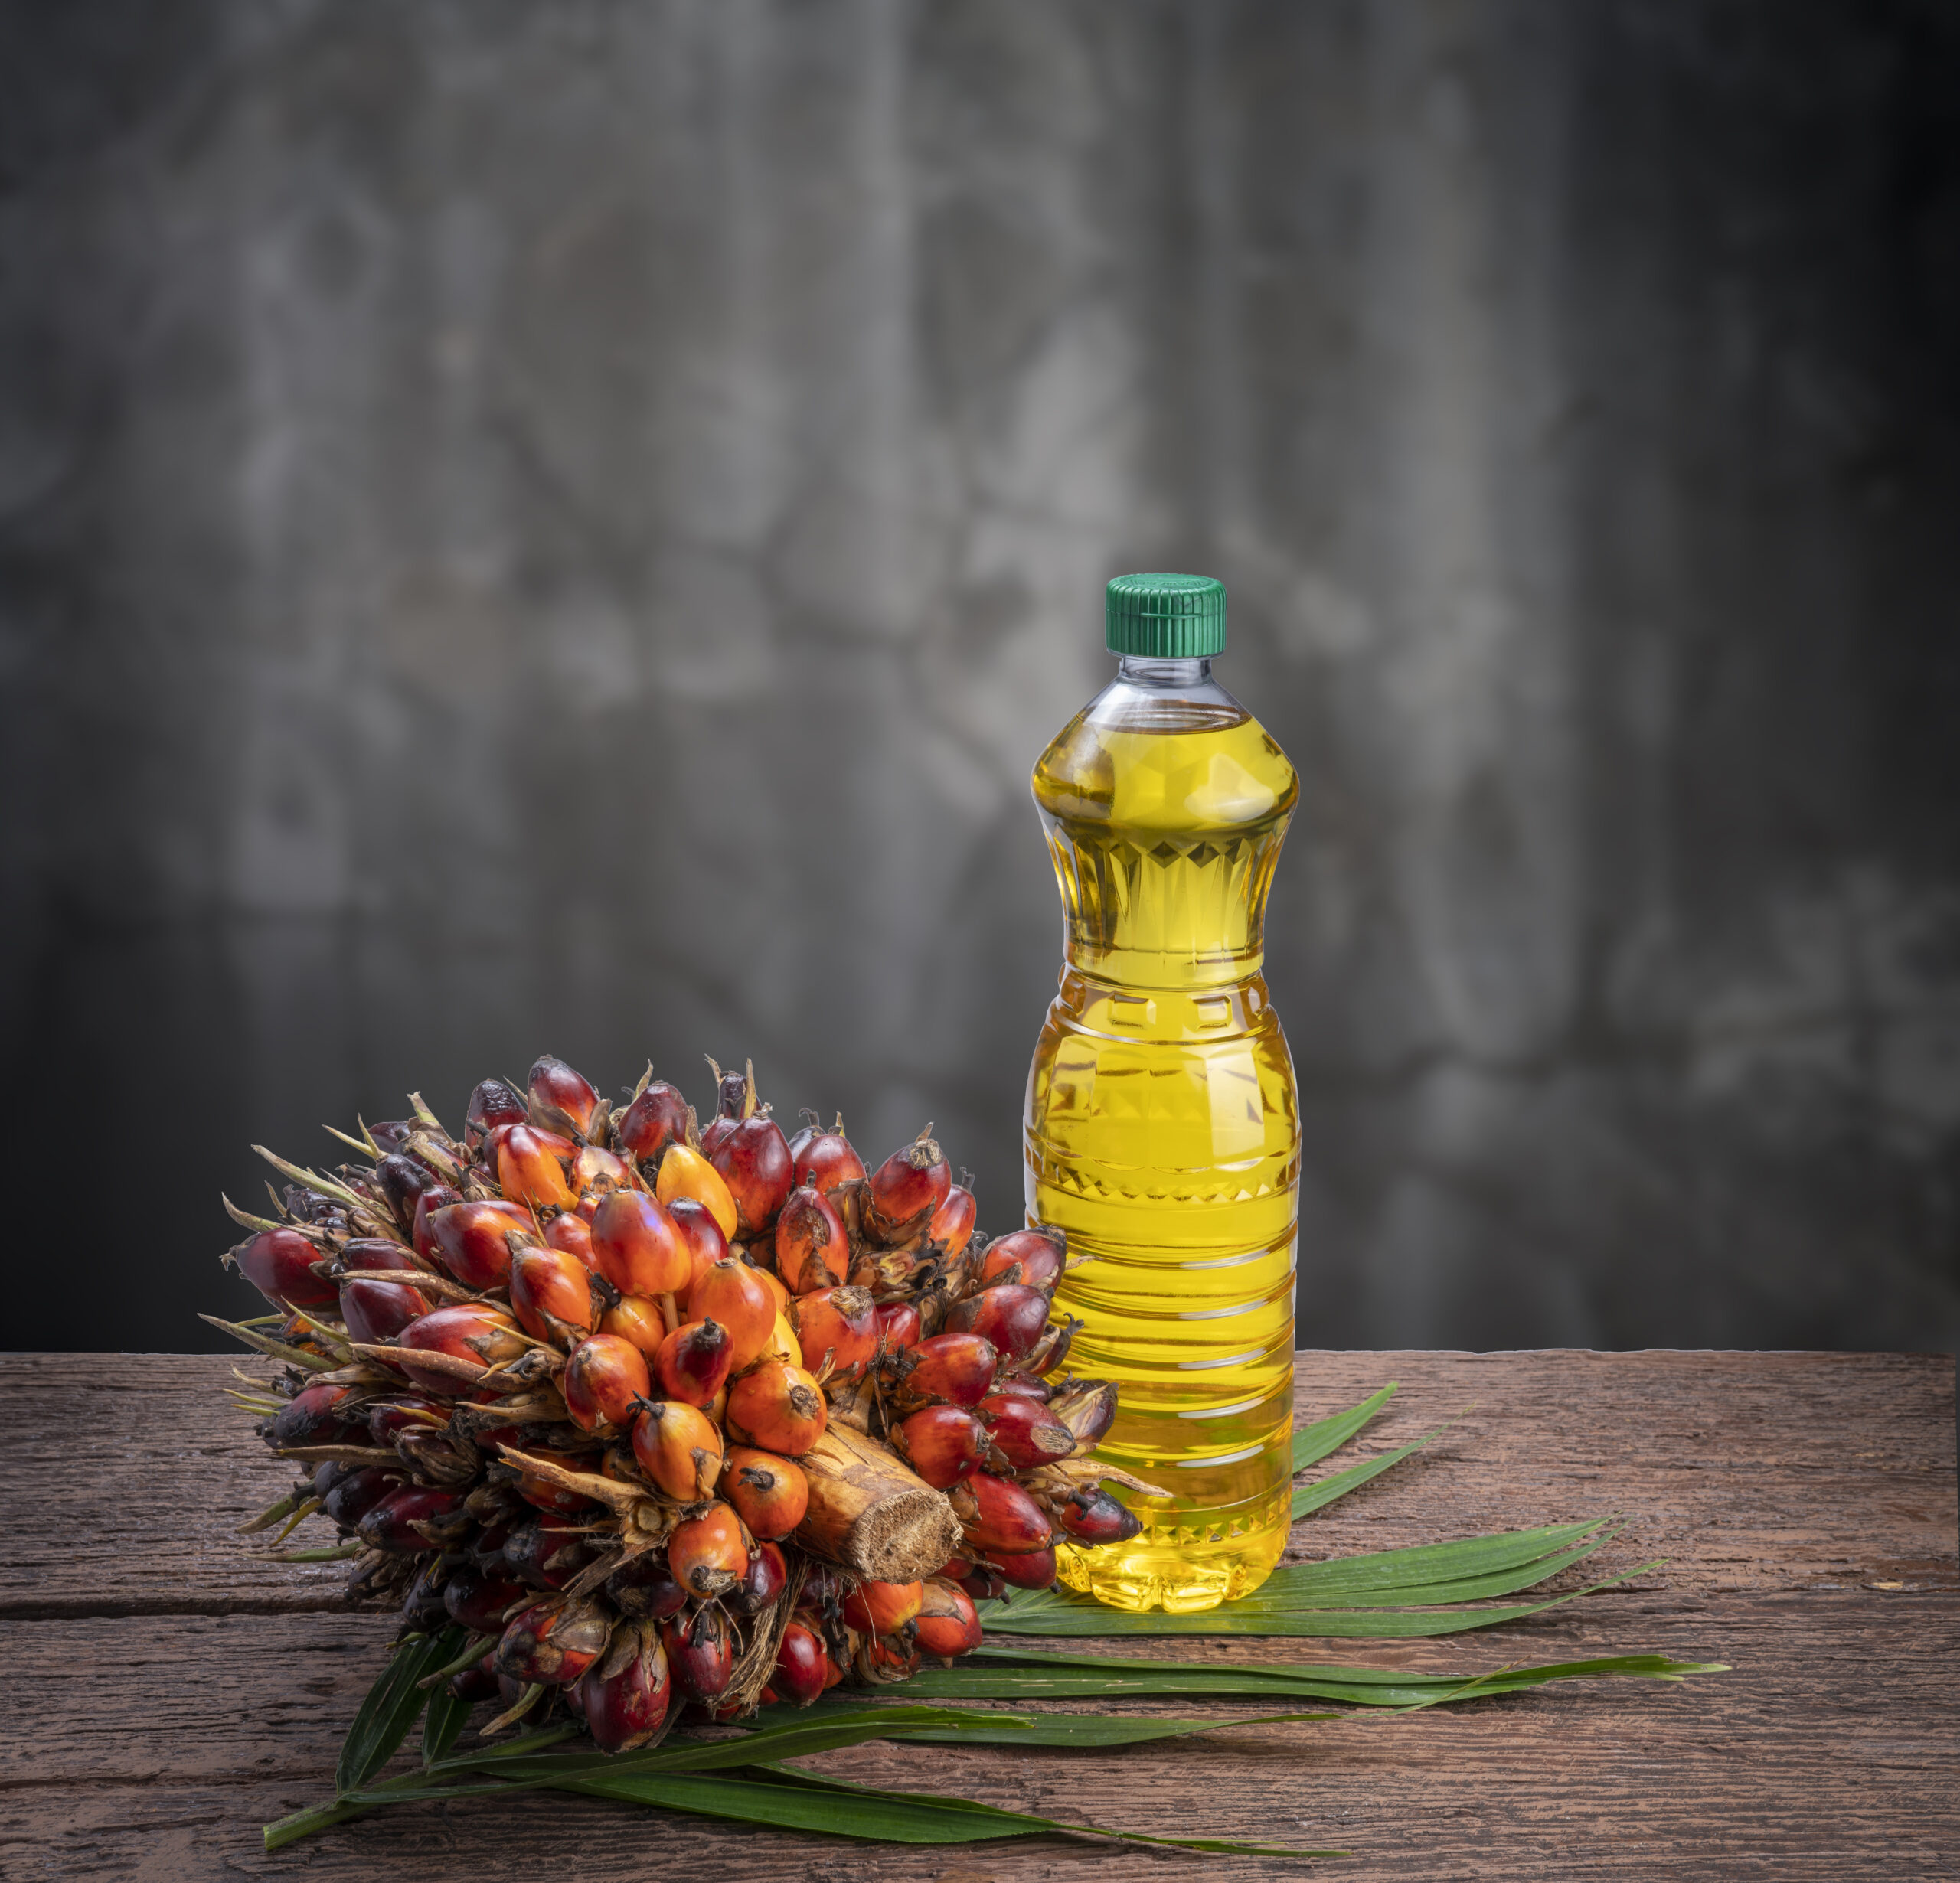 The reasons why palm oil is so controversial